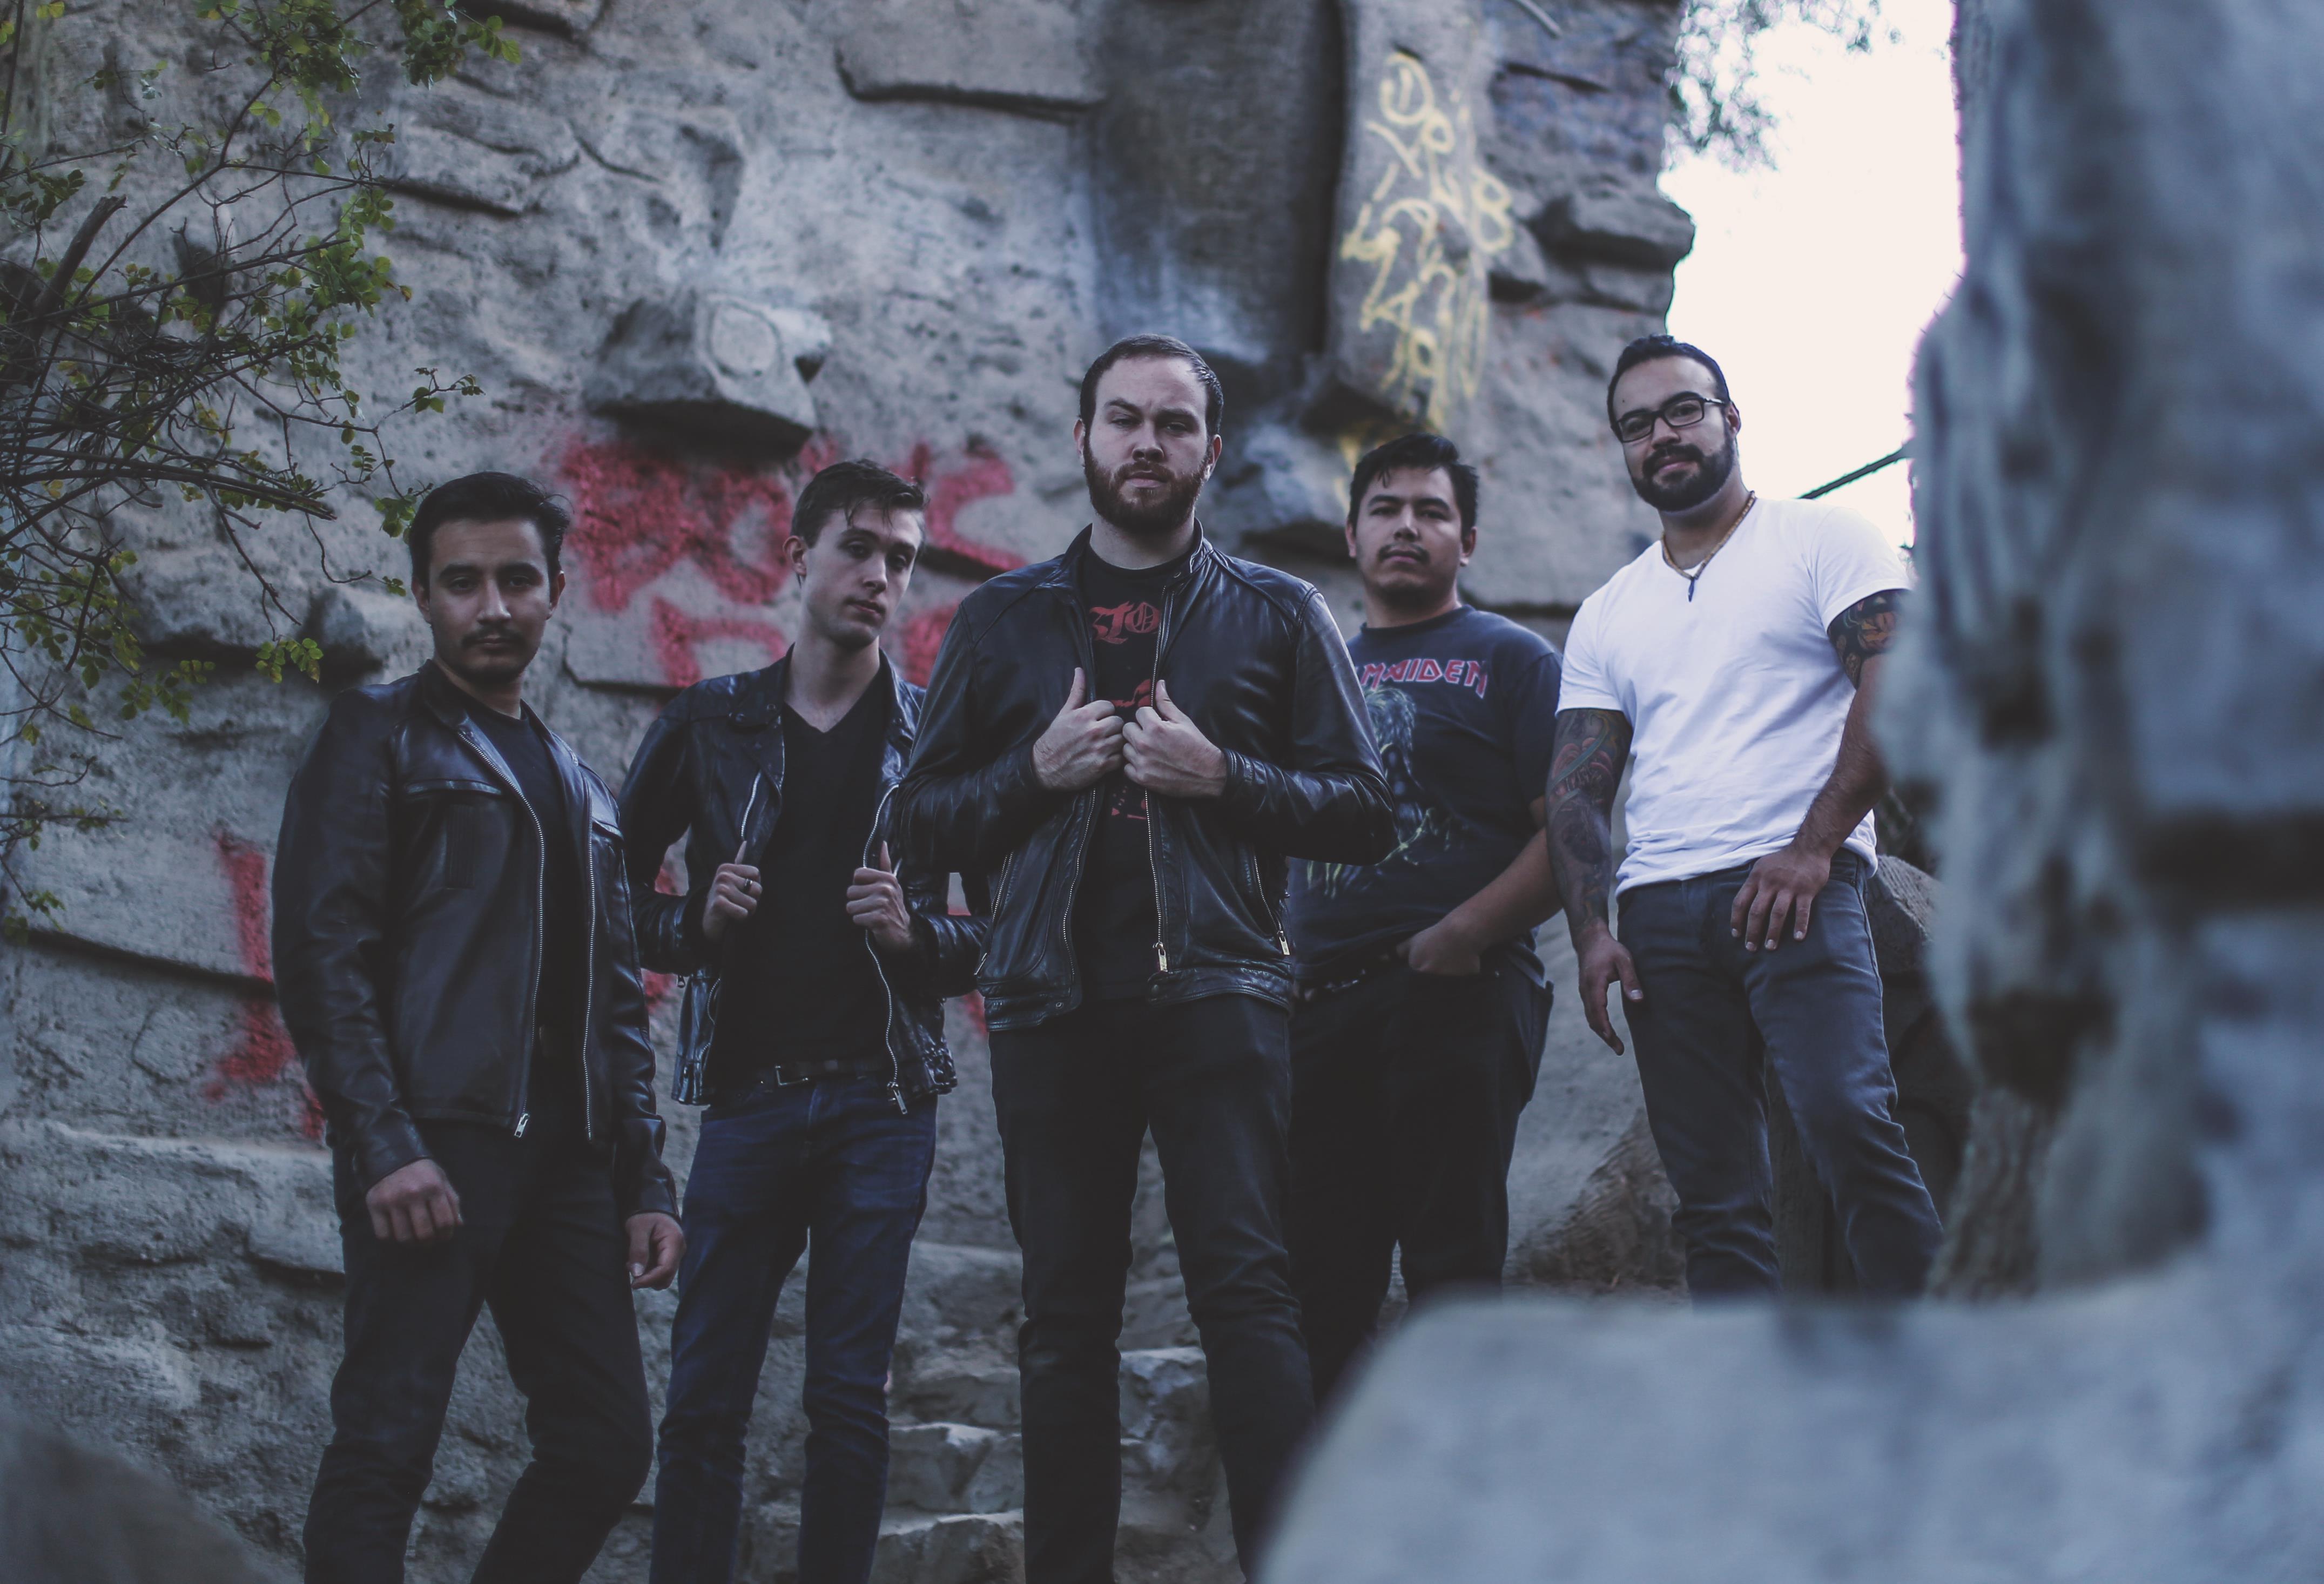 Interview: The Crown Remnant’s Geordy Shallon talks band’s style, censorship, Bill Murray, etc.